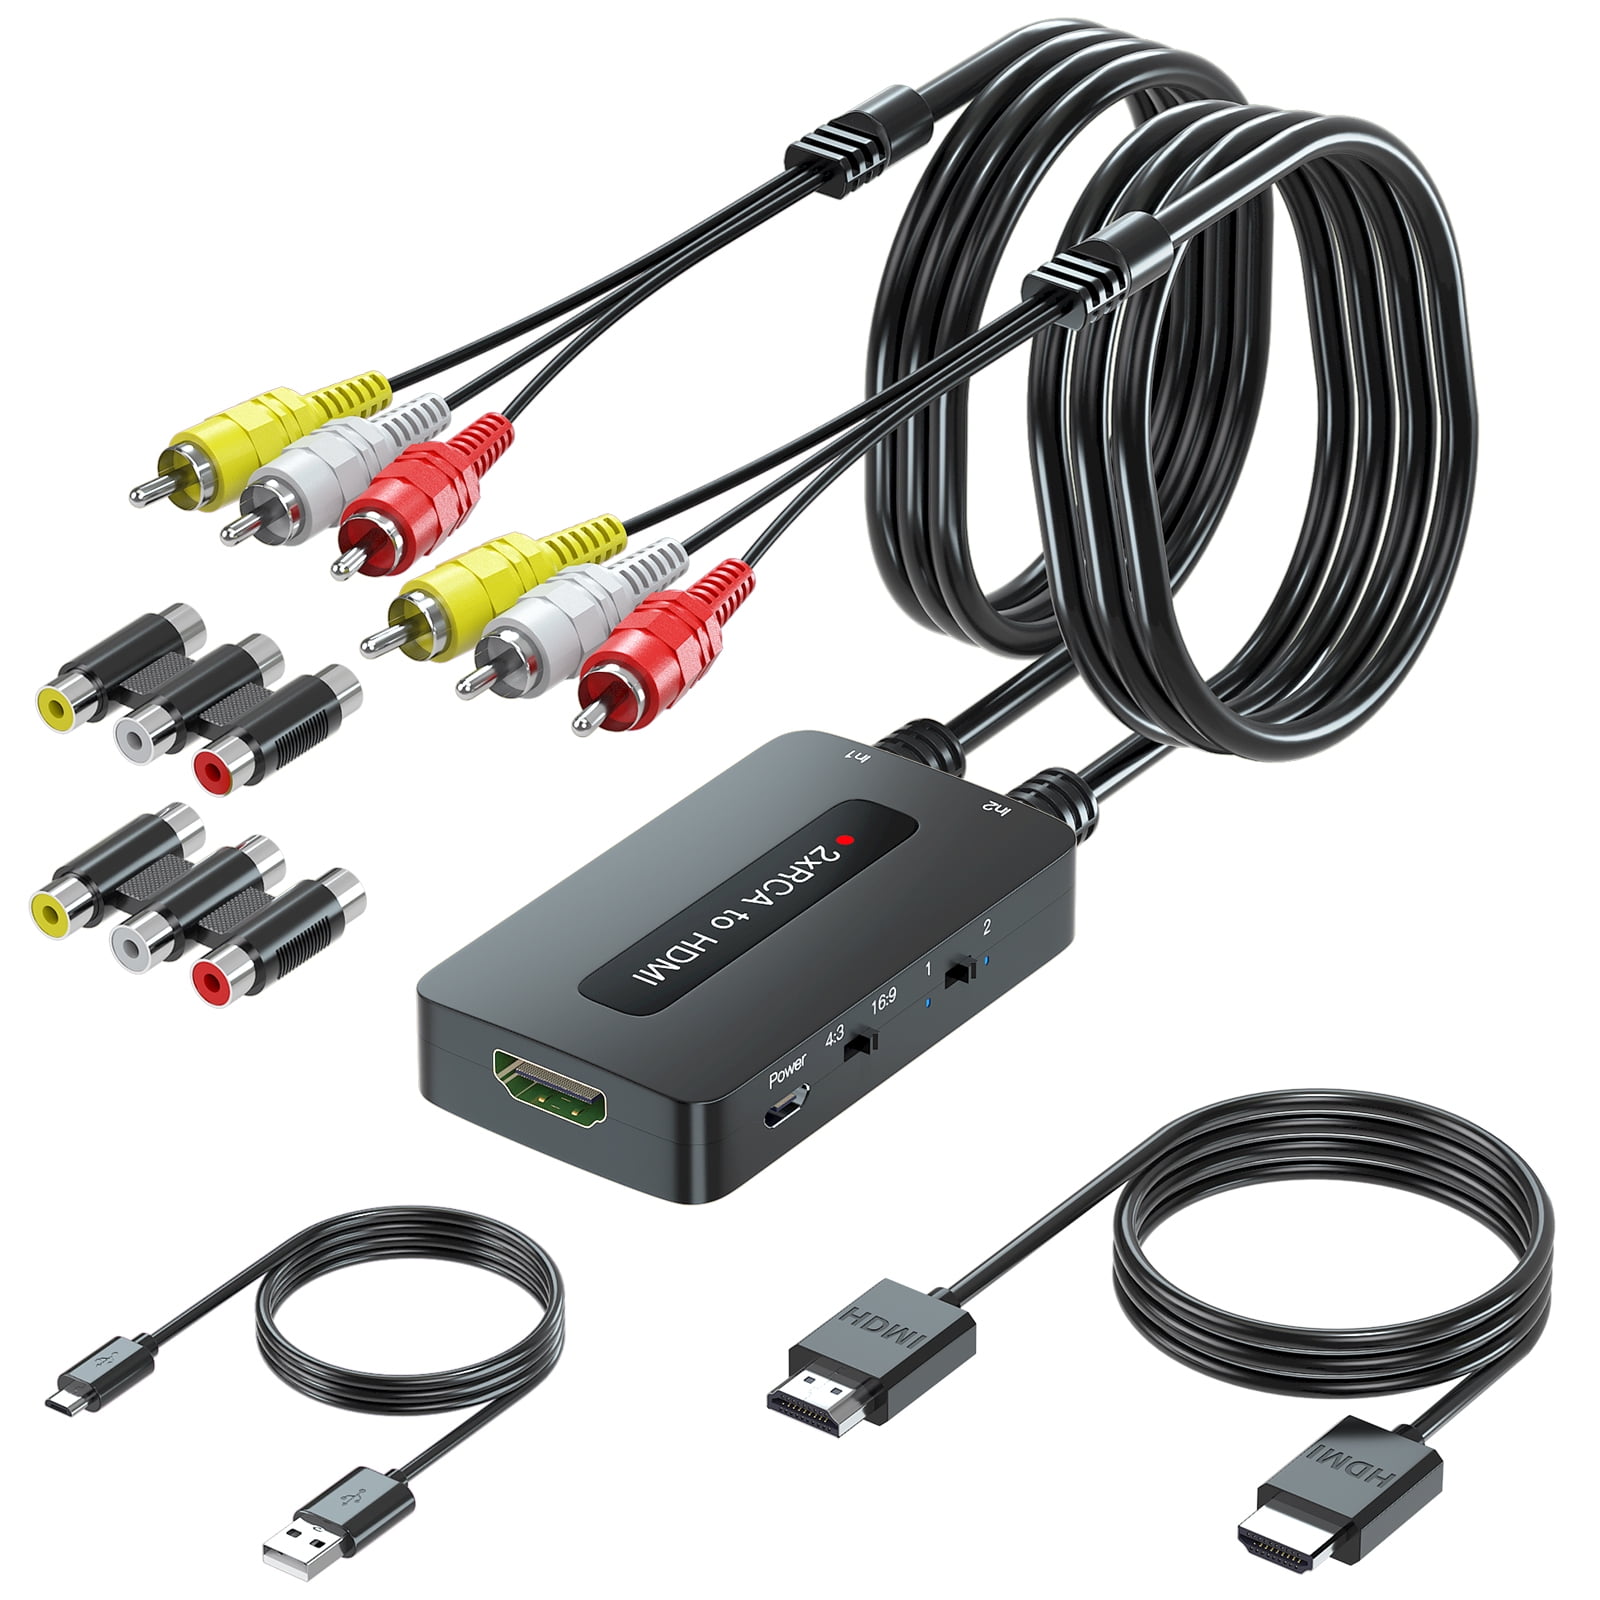 Maxim storm lort Two Port RCA to HDMI Converter, 2 AV to HDMI with 4 : 3/16 : 9 Aspect Ratio  Output Switch, Dual CVBS Composite to HDMI Converter for RCA Devices to  Display on HDTVs - Walmart.com